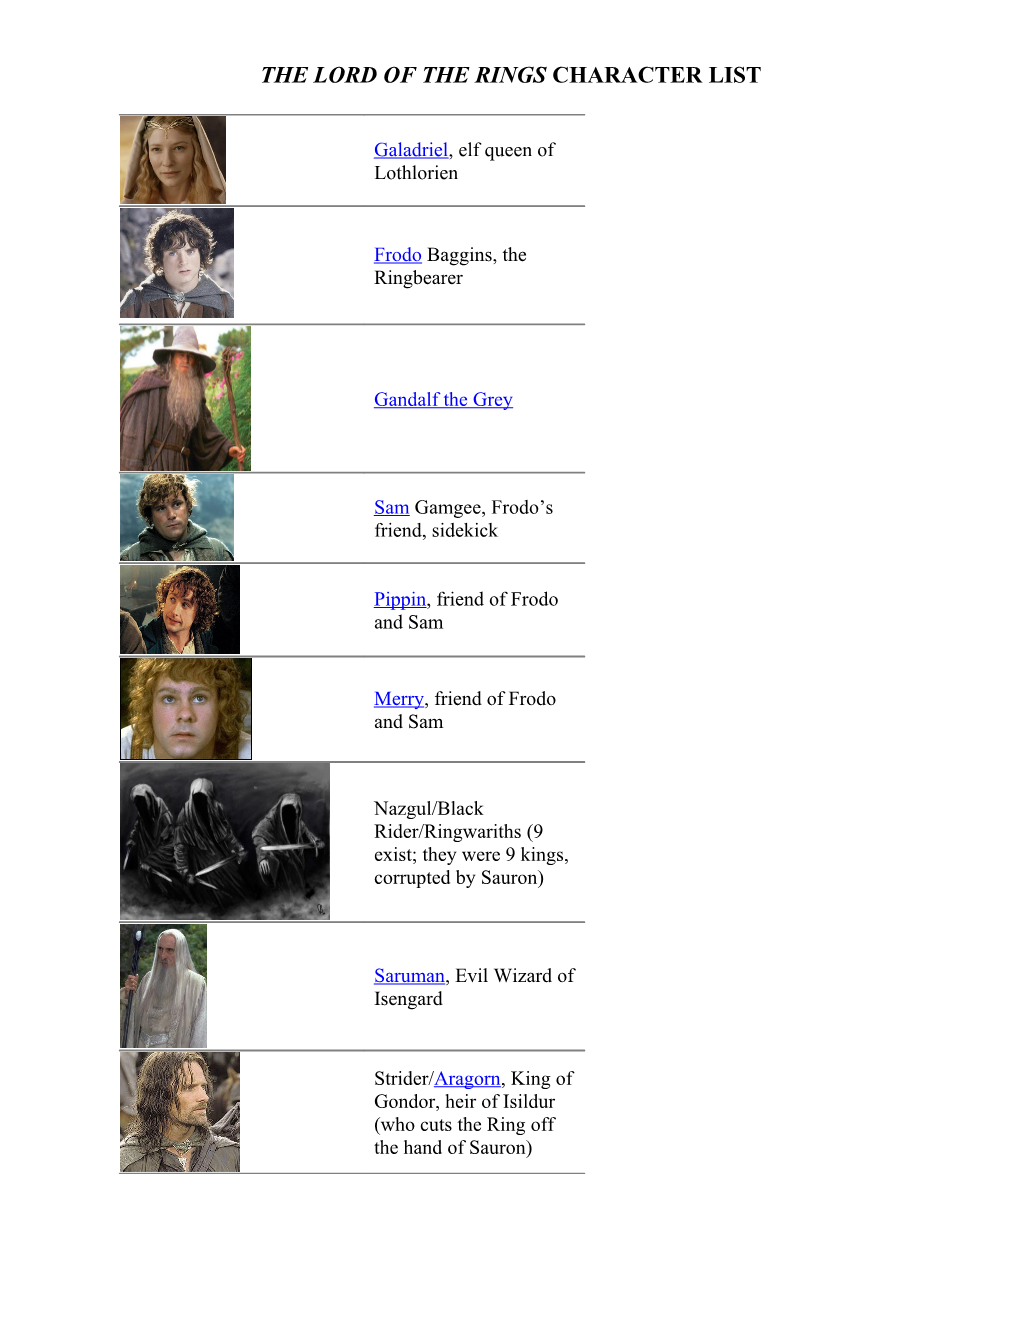 The Lord of the Rings Cast List